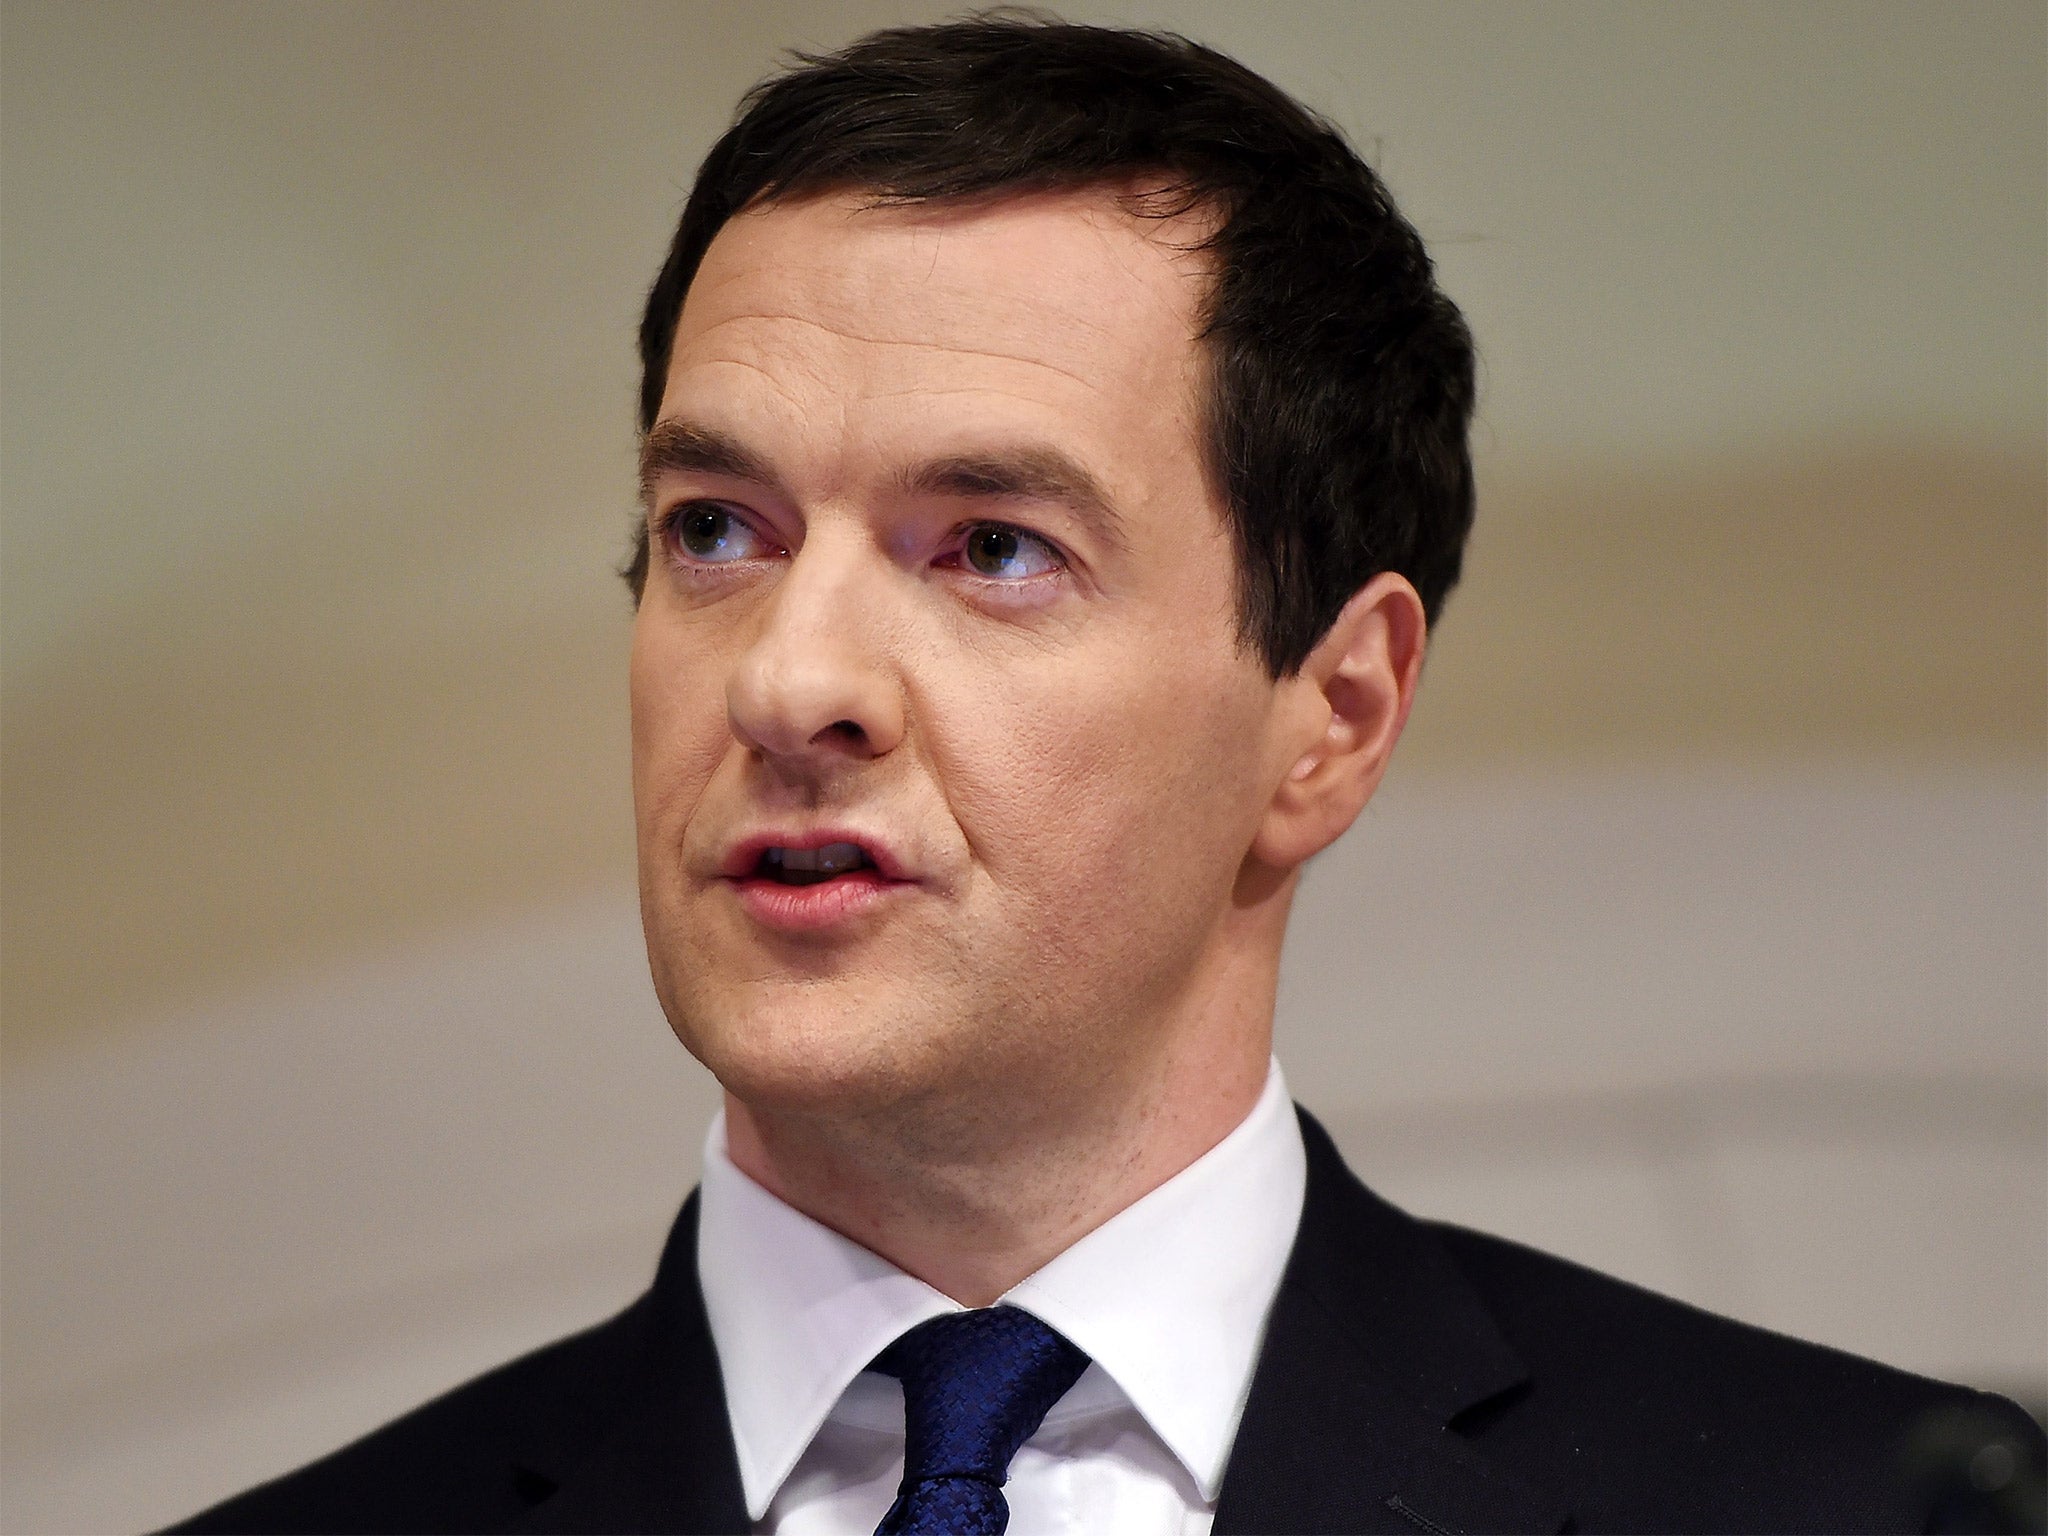 George Osborne said governments ‘should aim to run an overall budget surplus each and every year’